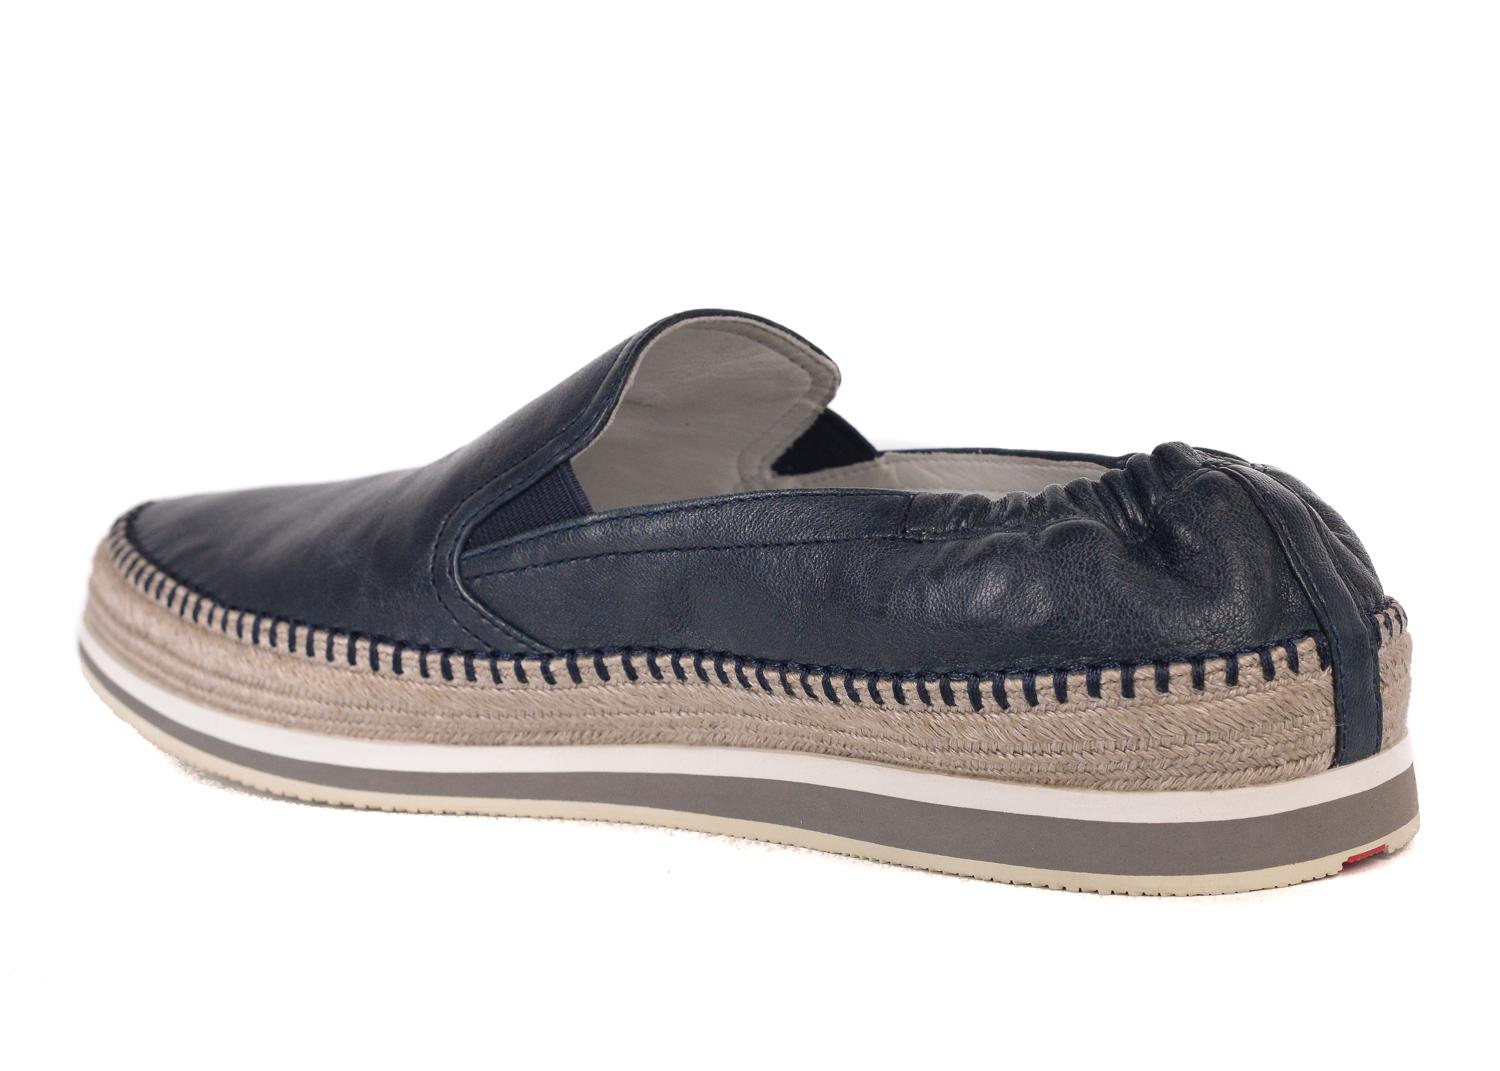 Prada Men's Navy Leather Slip On Braided Sidewall Loafers In New Condition For Sale In Brooklyn, NY